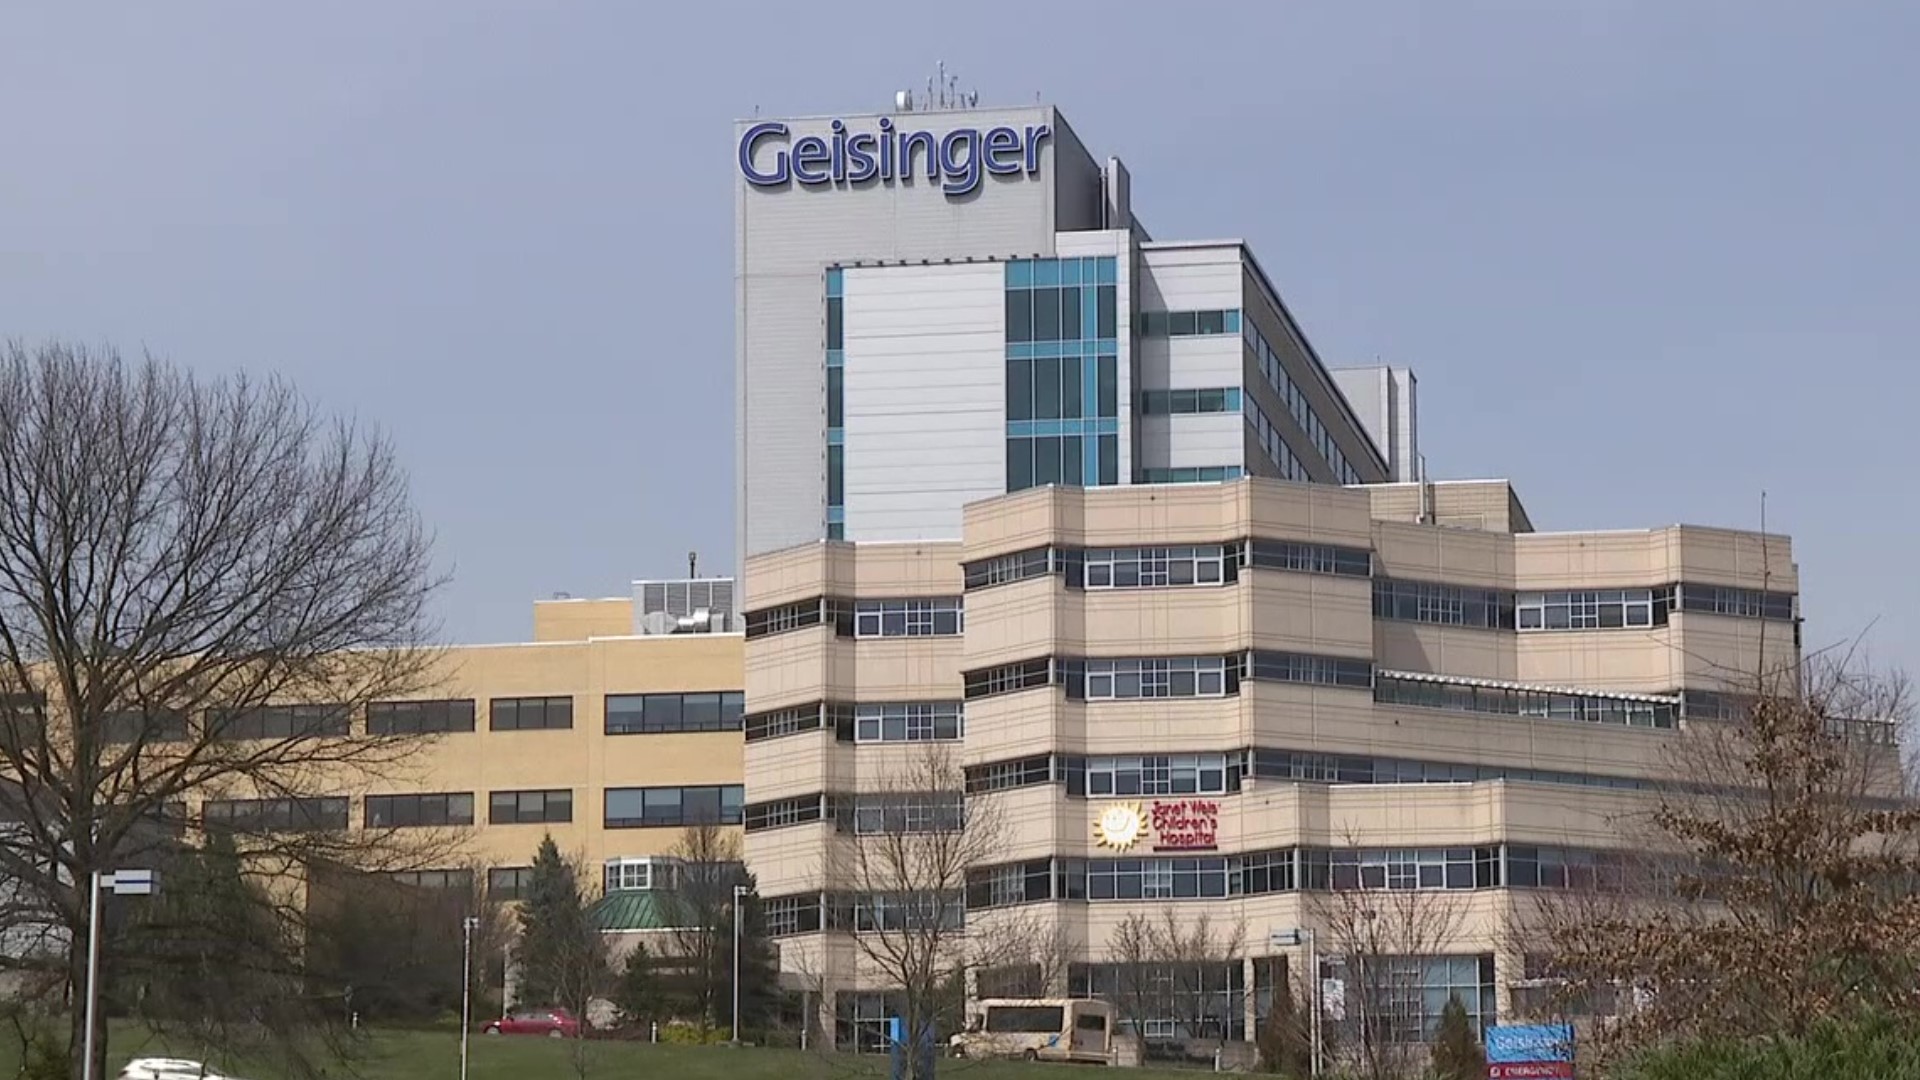 Three infants died from infections at Geisinger last year.